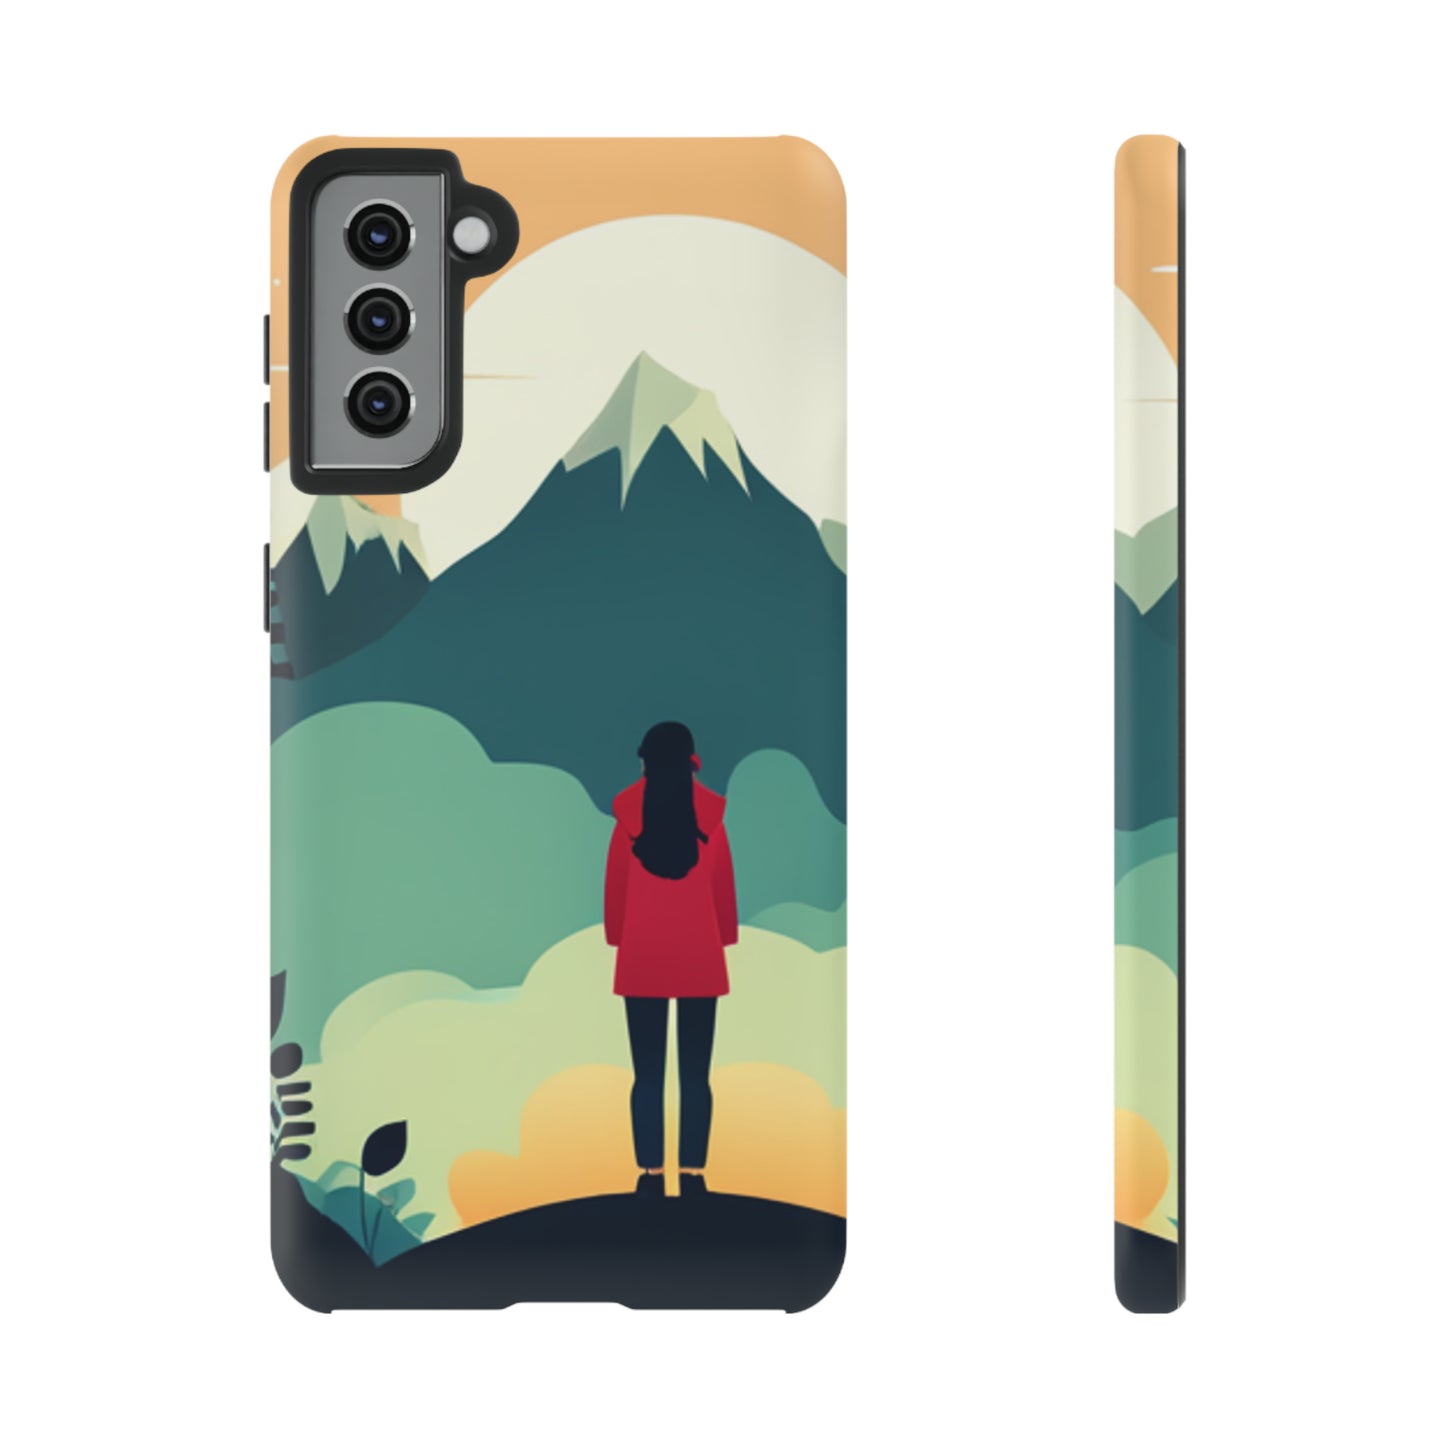 Adventer Seeker Phone Case for iPhones and Androids